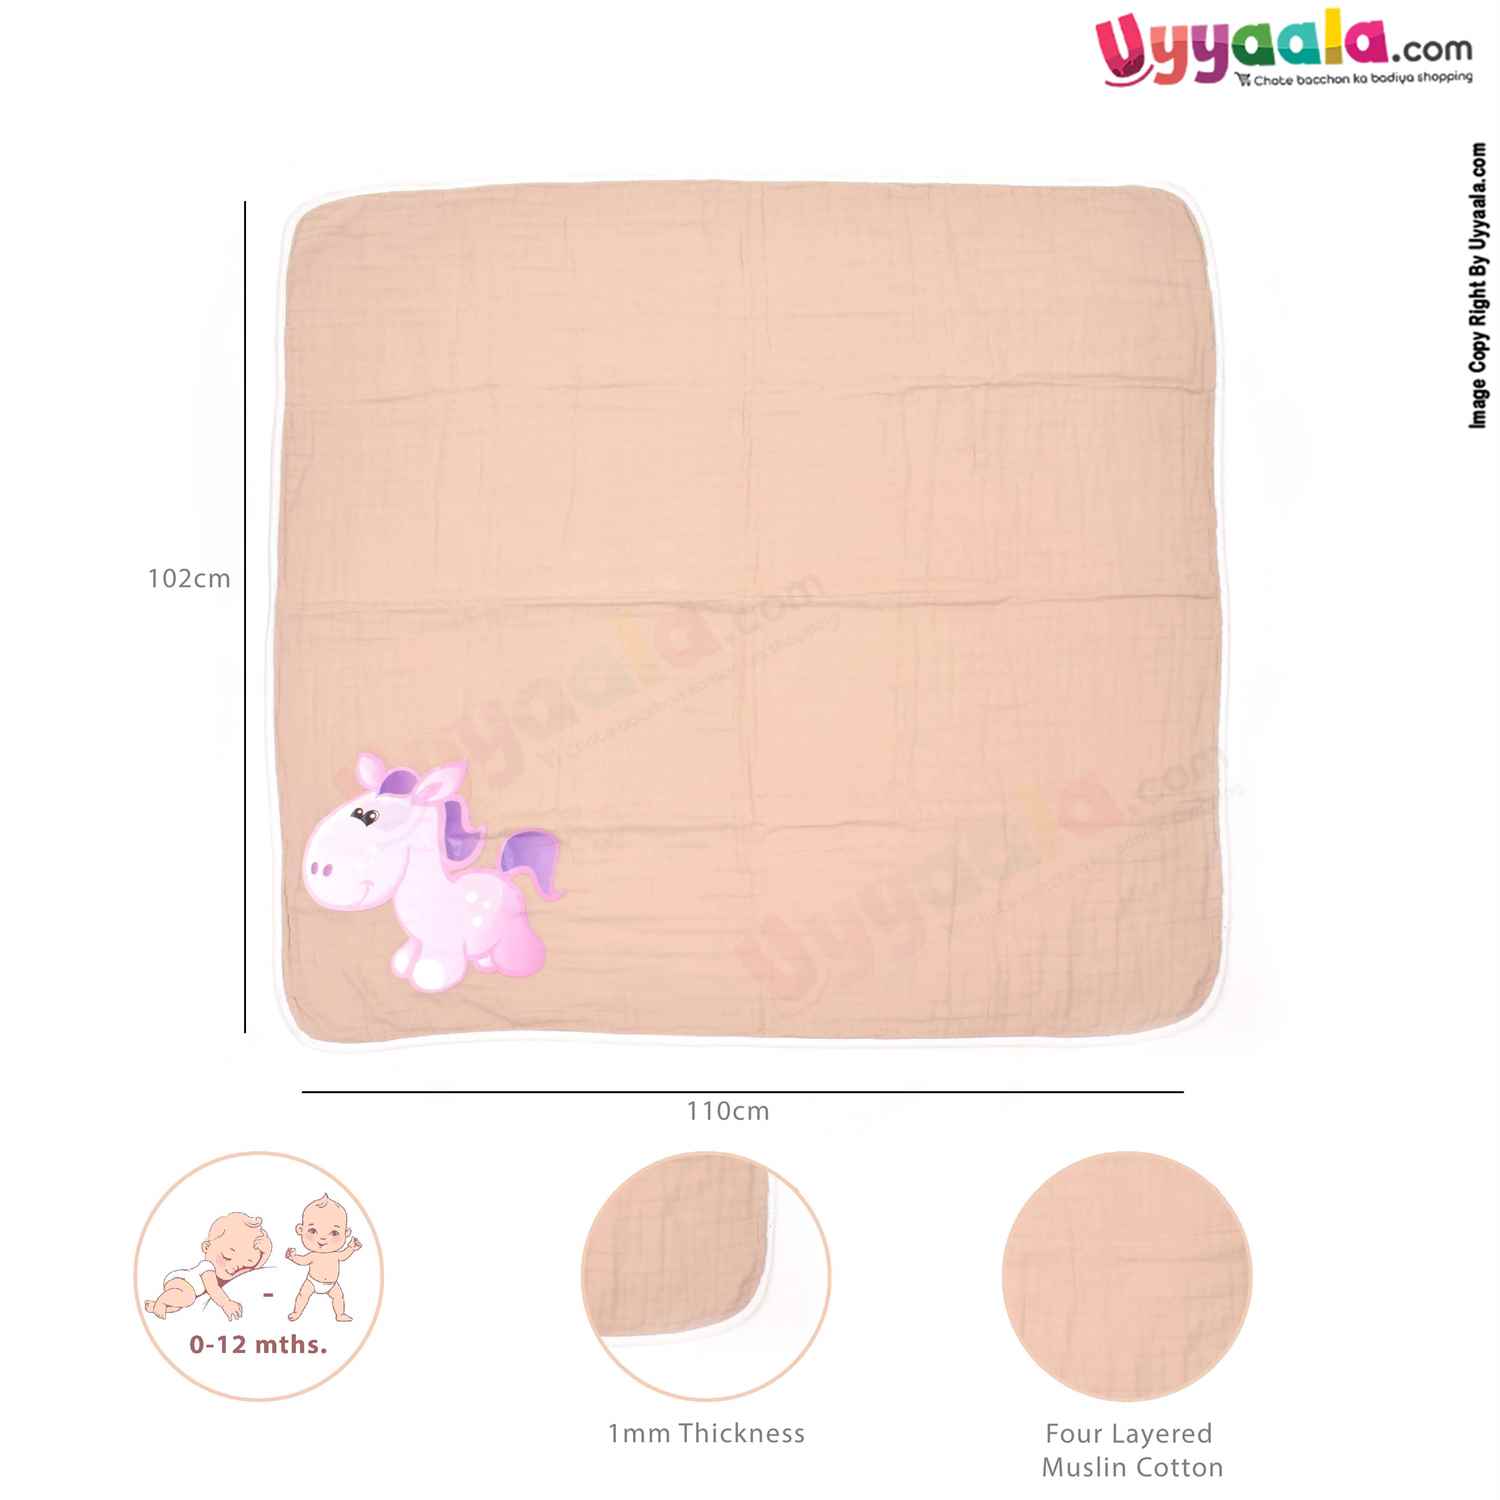 Four Layered Muslin Cotton Wrapper with Donkey Print for Babies 0-12m Age, Size(110*102cm)- Light Brown